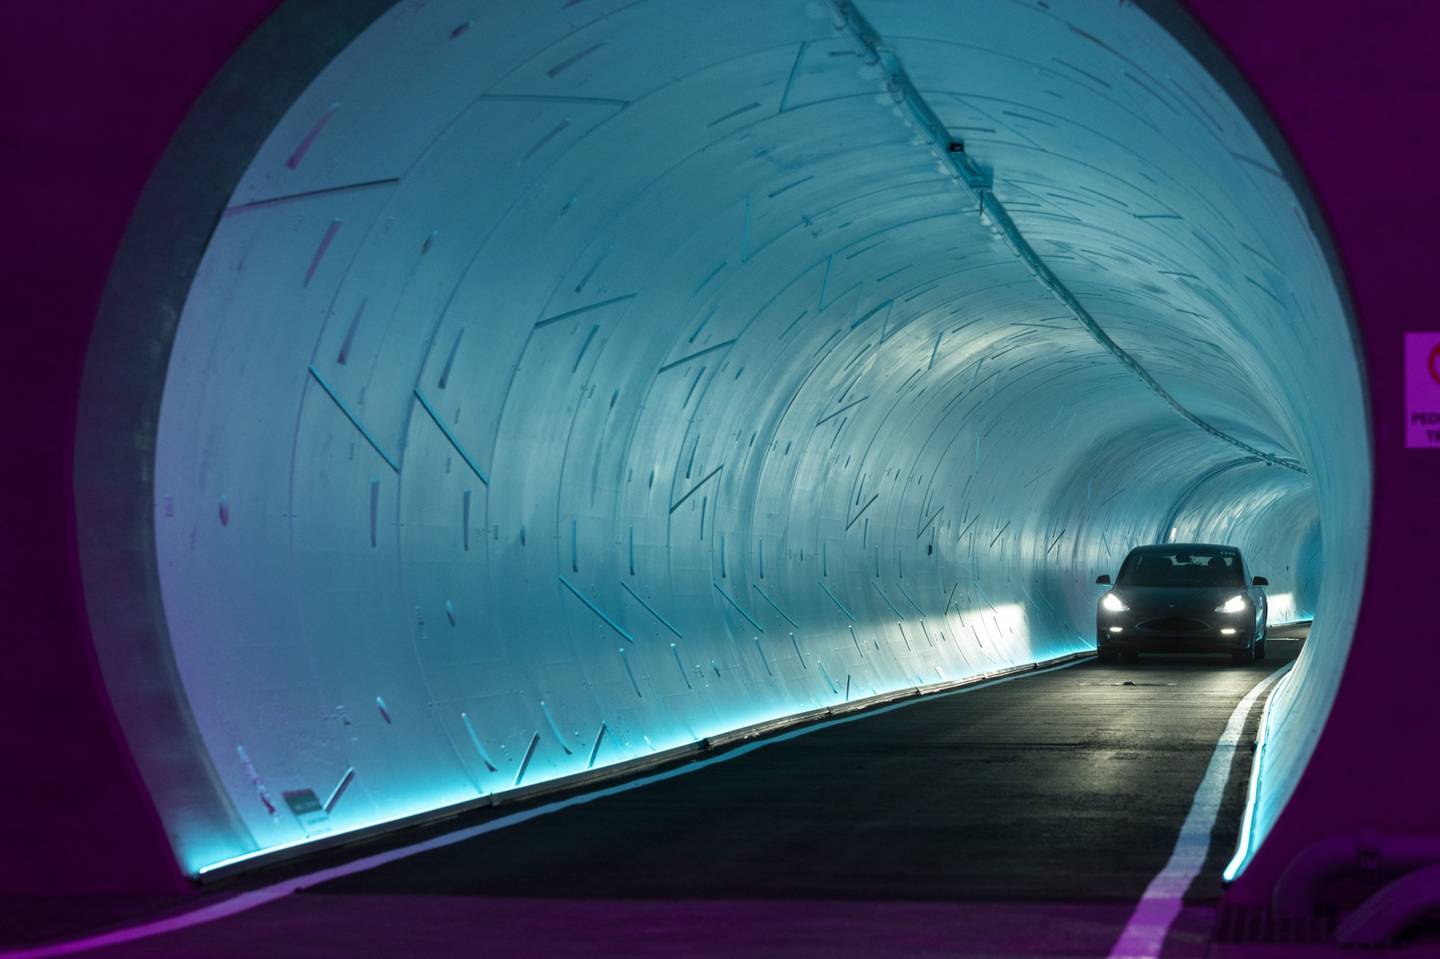 A Tesla Inc. electric vehicle passes through an underground tunnel during a tour of the Boring Co. Convention Center Loop in Las Vegas, Nevada, U.S., on Friday, April 9, 2021. Once operational, Tesla vehicles capable of carrying up to 16 passengers will shuttle through the tunnel, turning a 1.5 mile walk on the surface into a trip that takes a couple of minutes.dfd